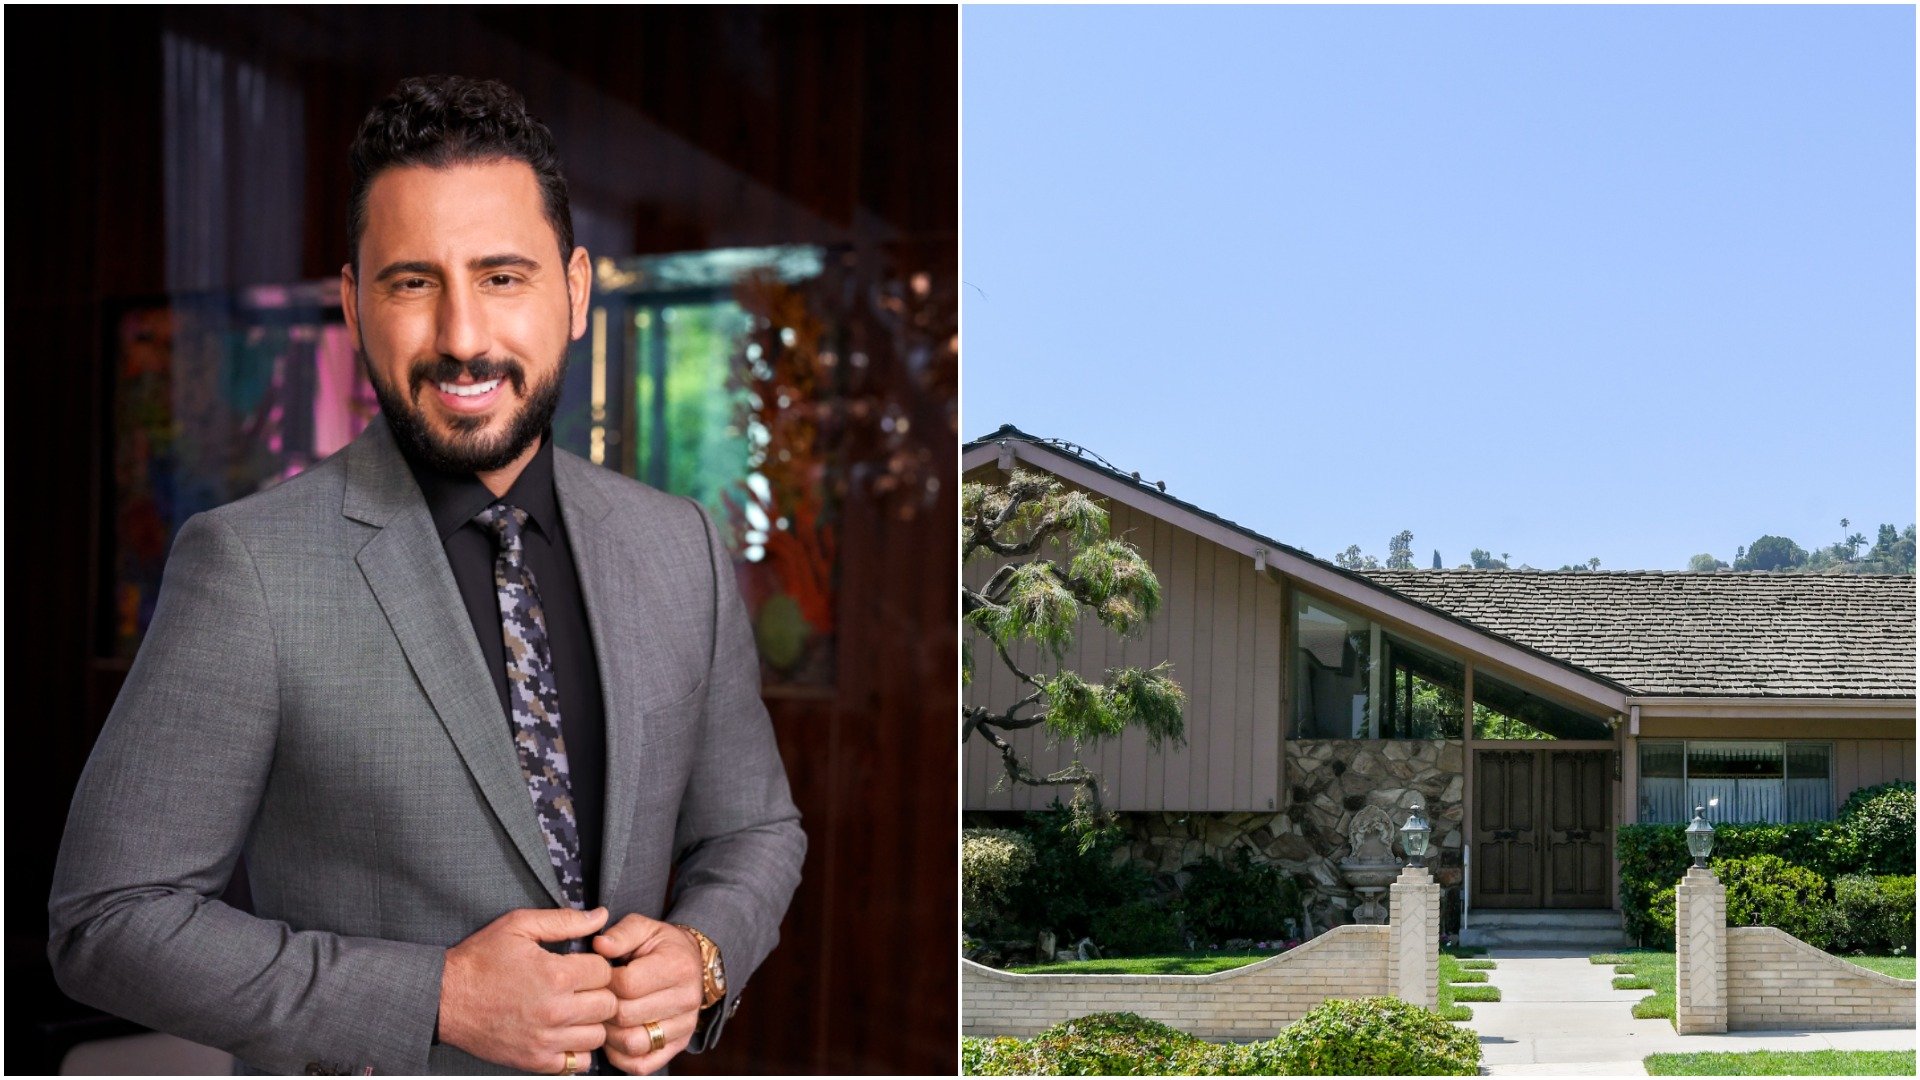 Josh Altman from Million Dollar Listing Los Angles has a Brady Bunch situation on his hands?